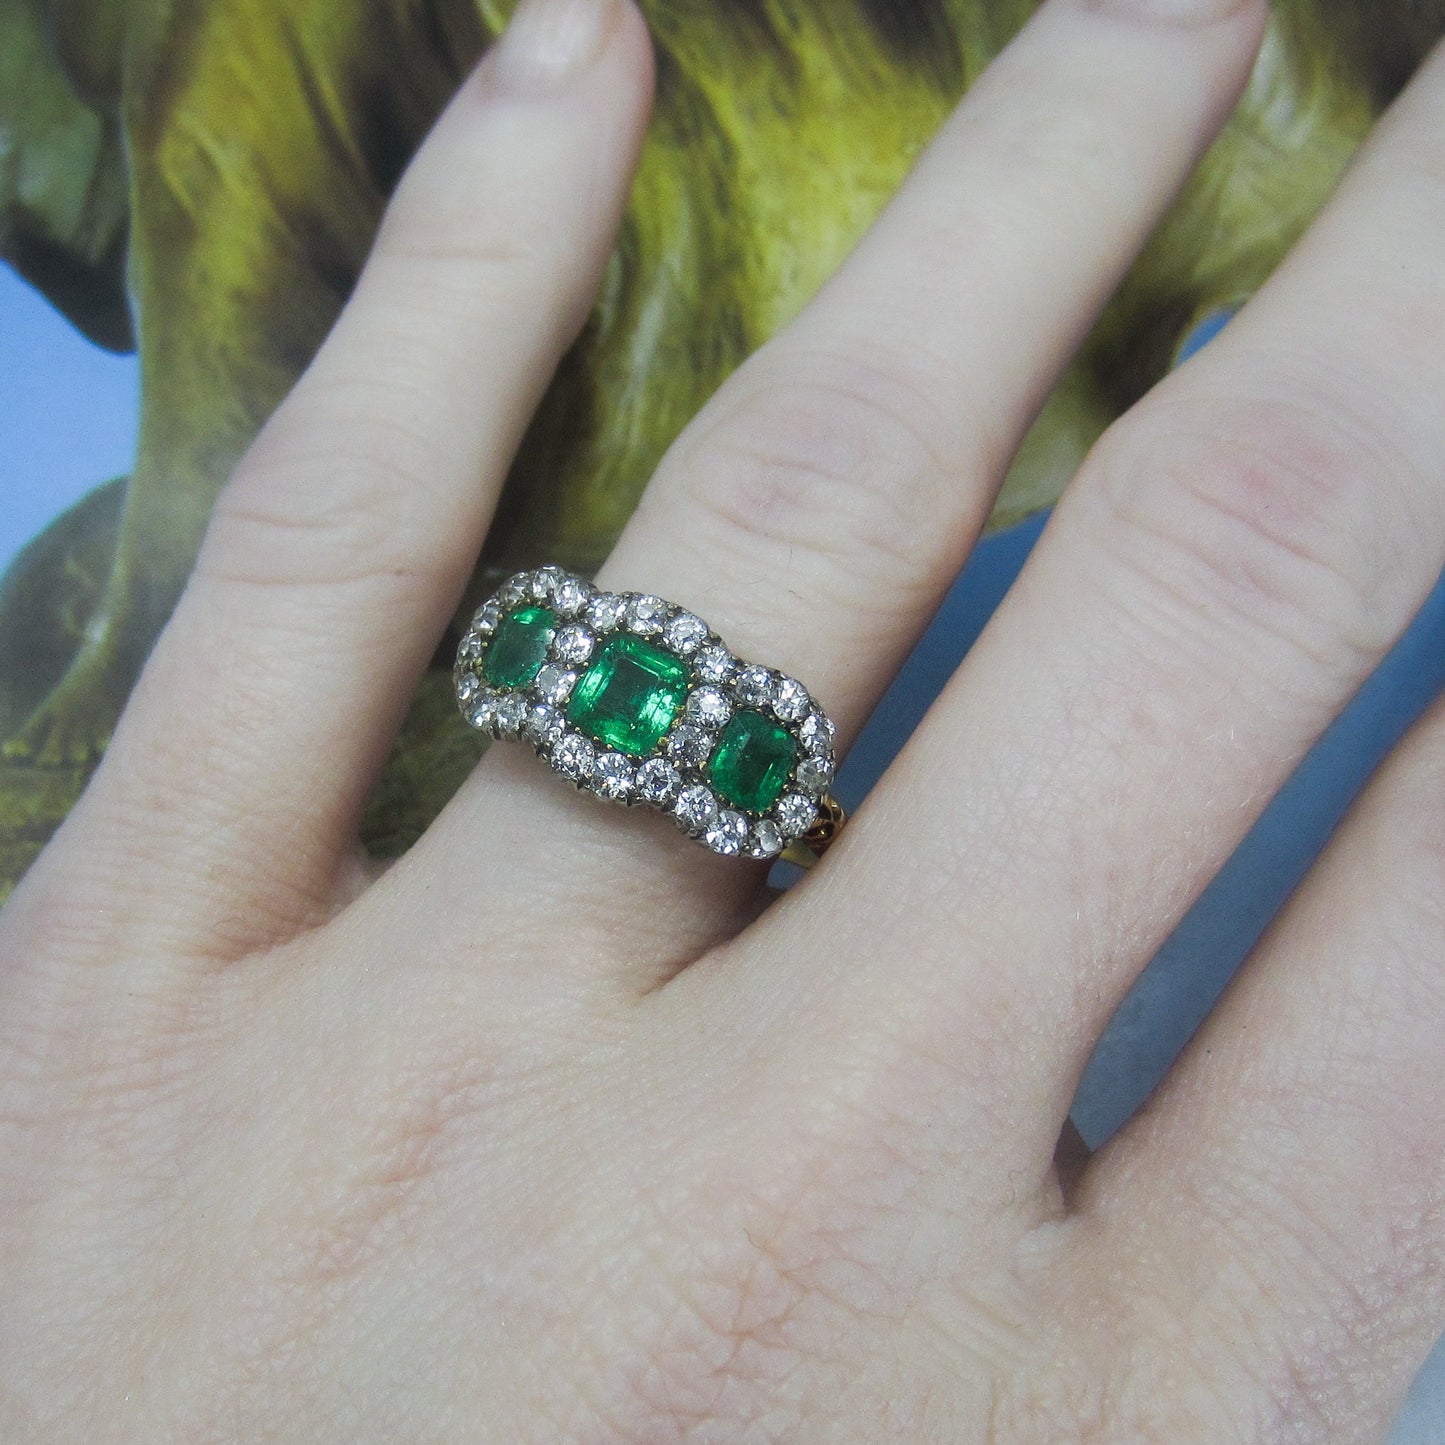 HOLD--Incredible Victorian Emerald and Diamond Cluster Ring Silver/18k c. 1850